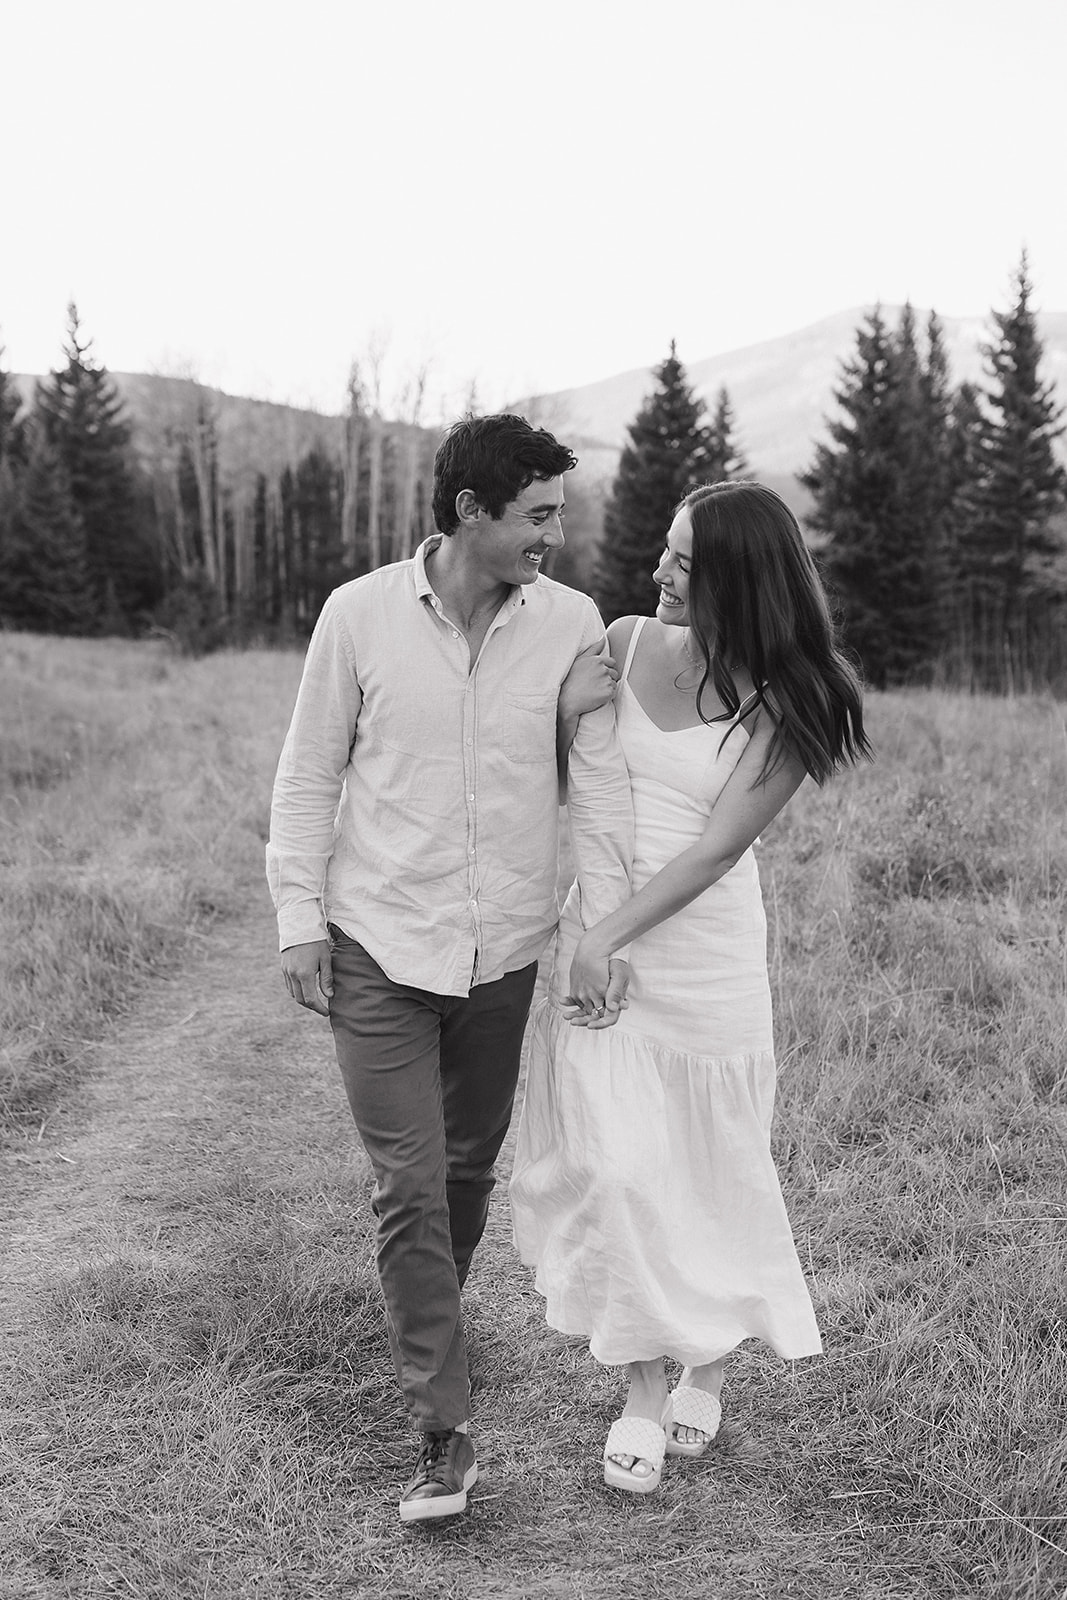 in-love couples engagement photography in Colorado's picturesque mountain range background